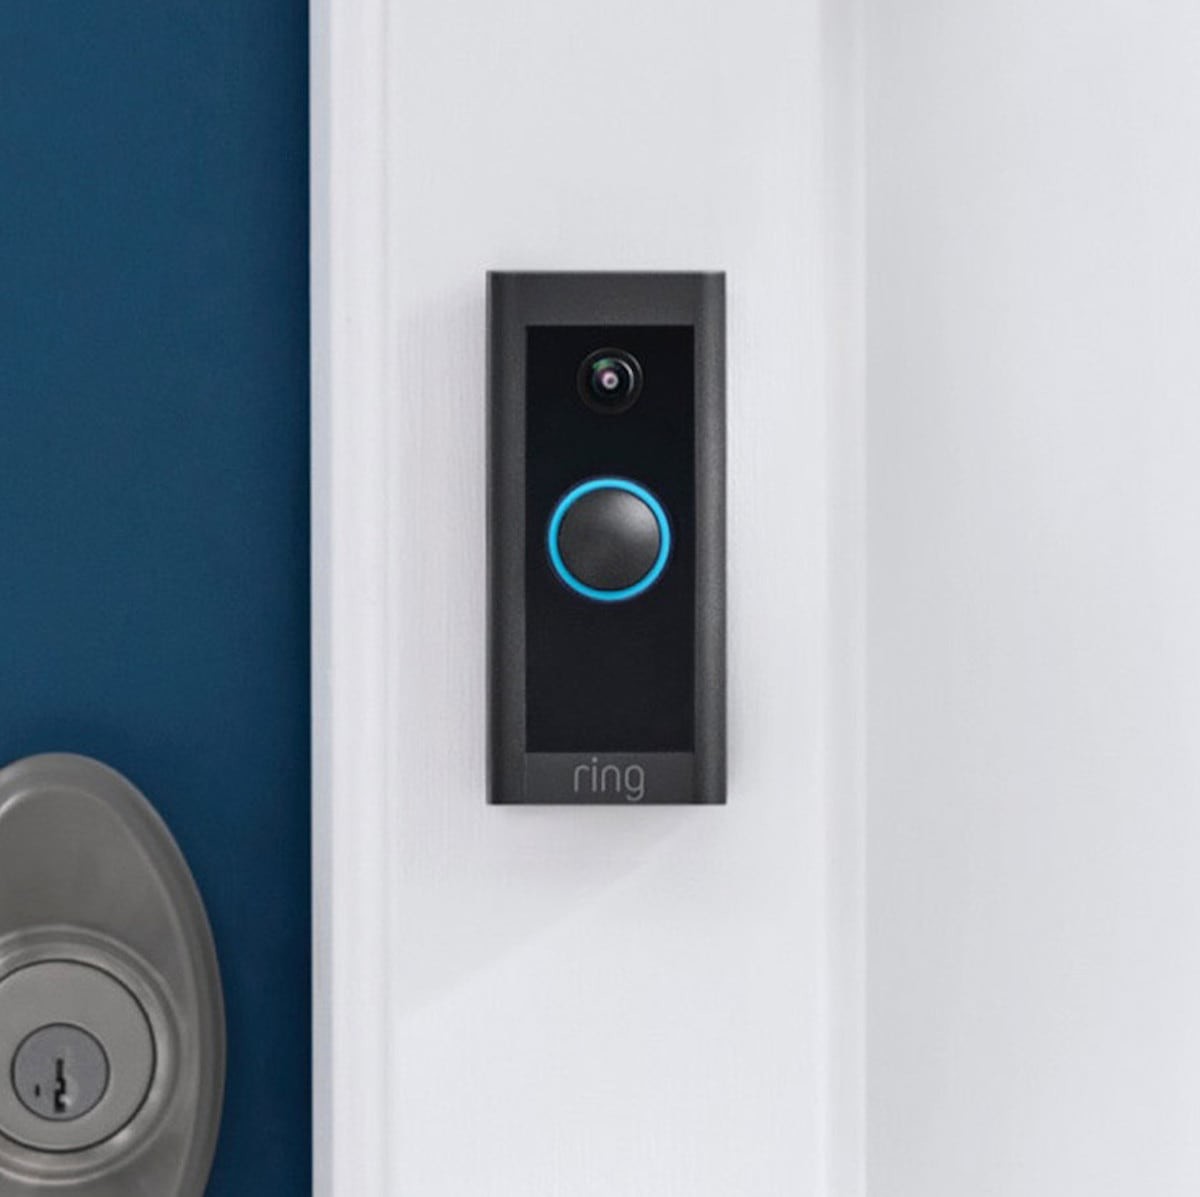 Ring introduces a $60 smart doorbell—the smallest and the cheapest yet